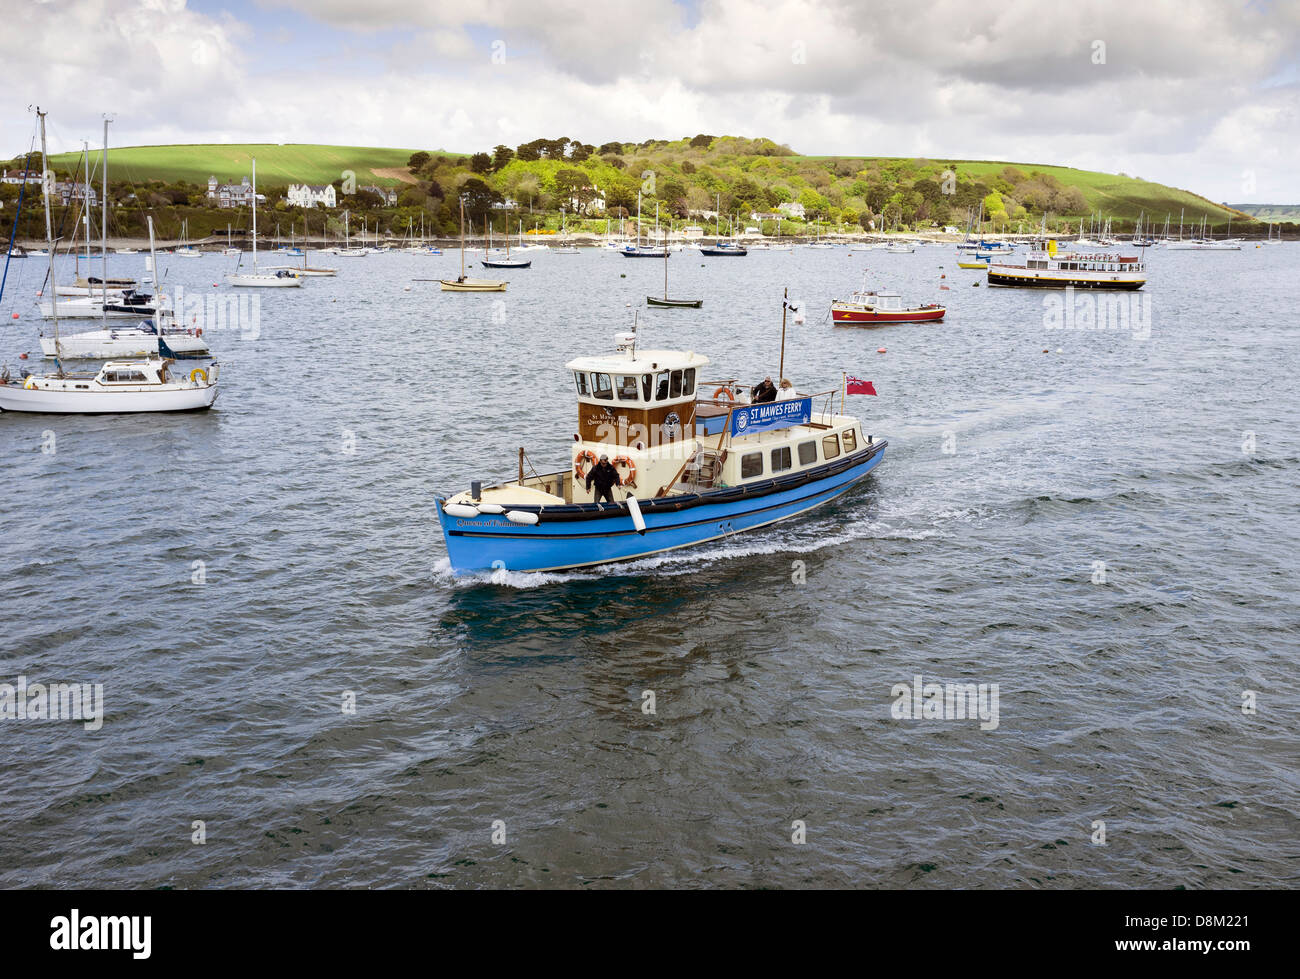 The St Mawes Ferry in Falmouth Harbour. Stock Photo